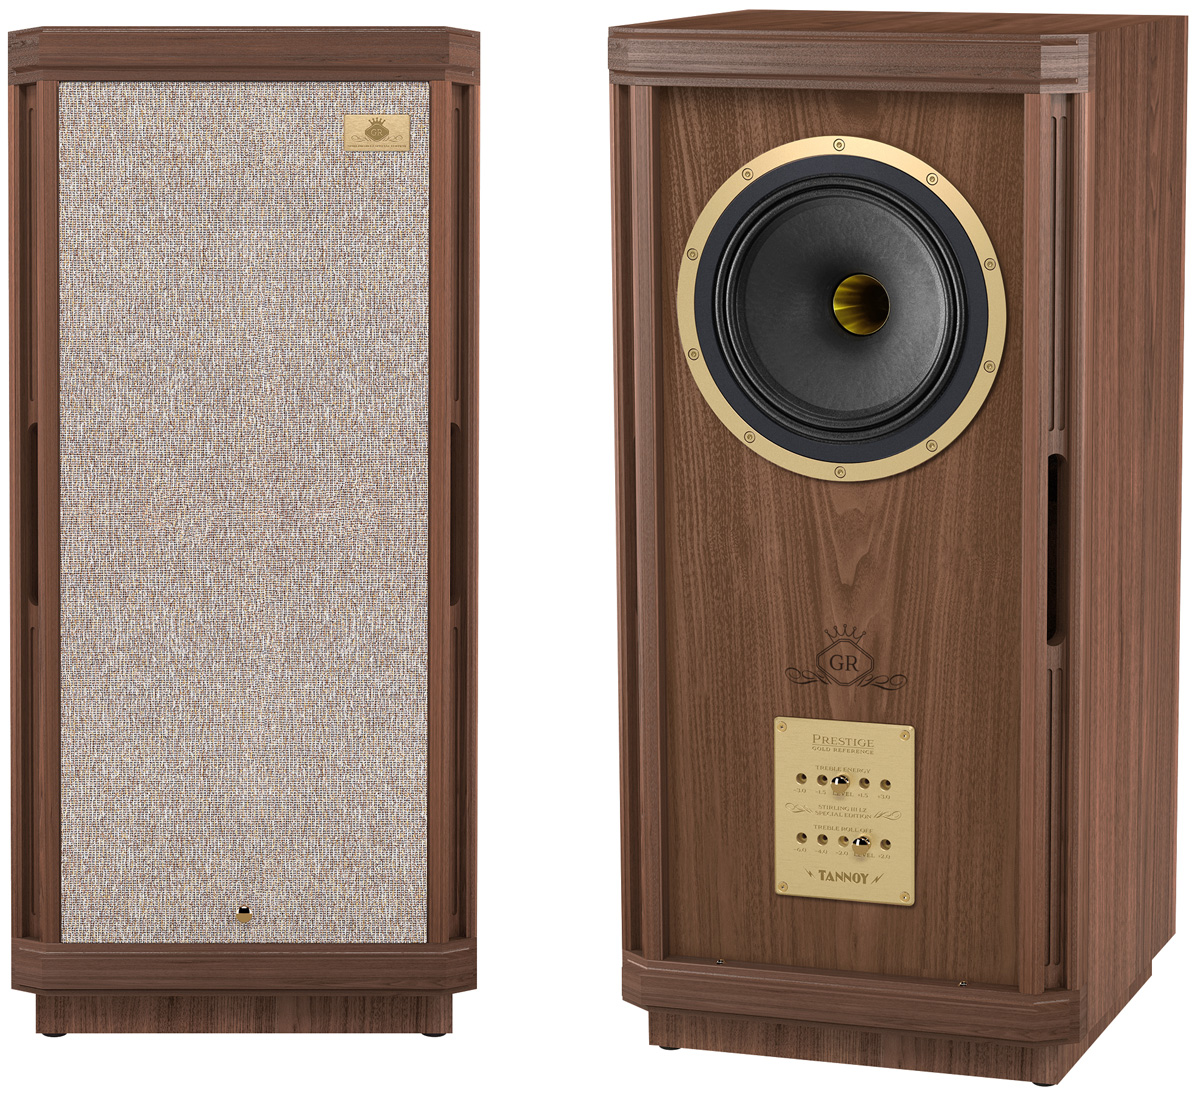 TANNOY、シカゴAxponaにて新製品『Stirling III LZ Special Edition